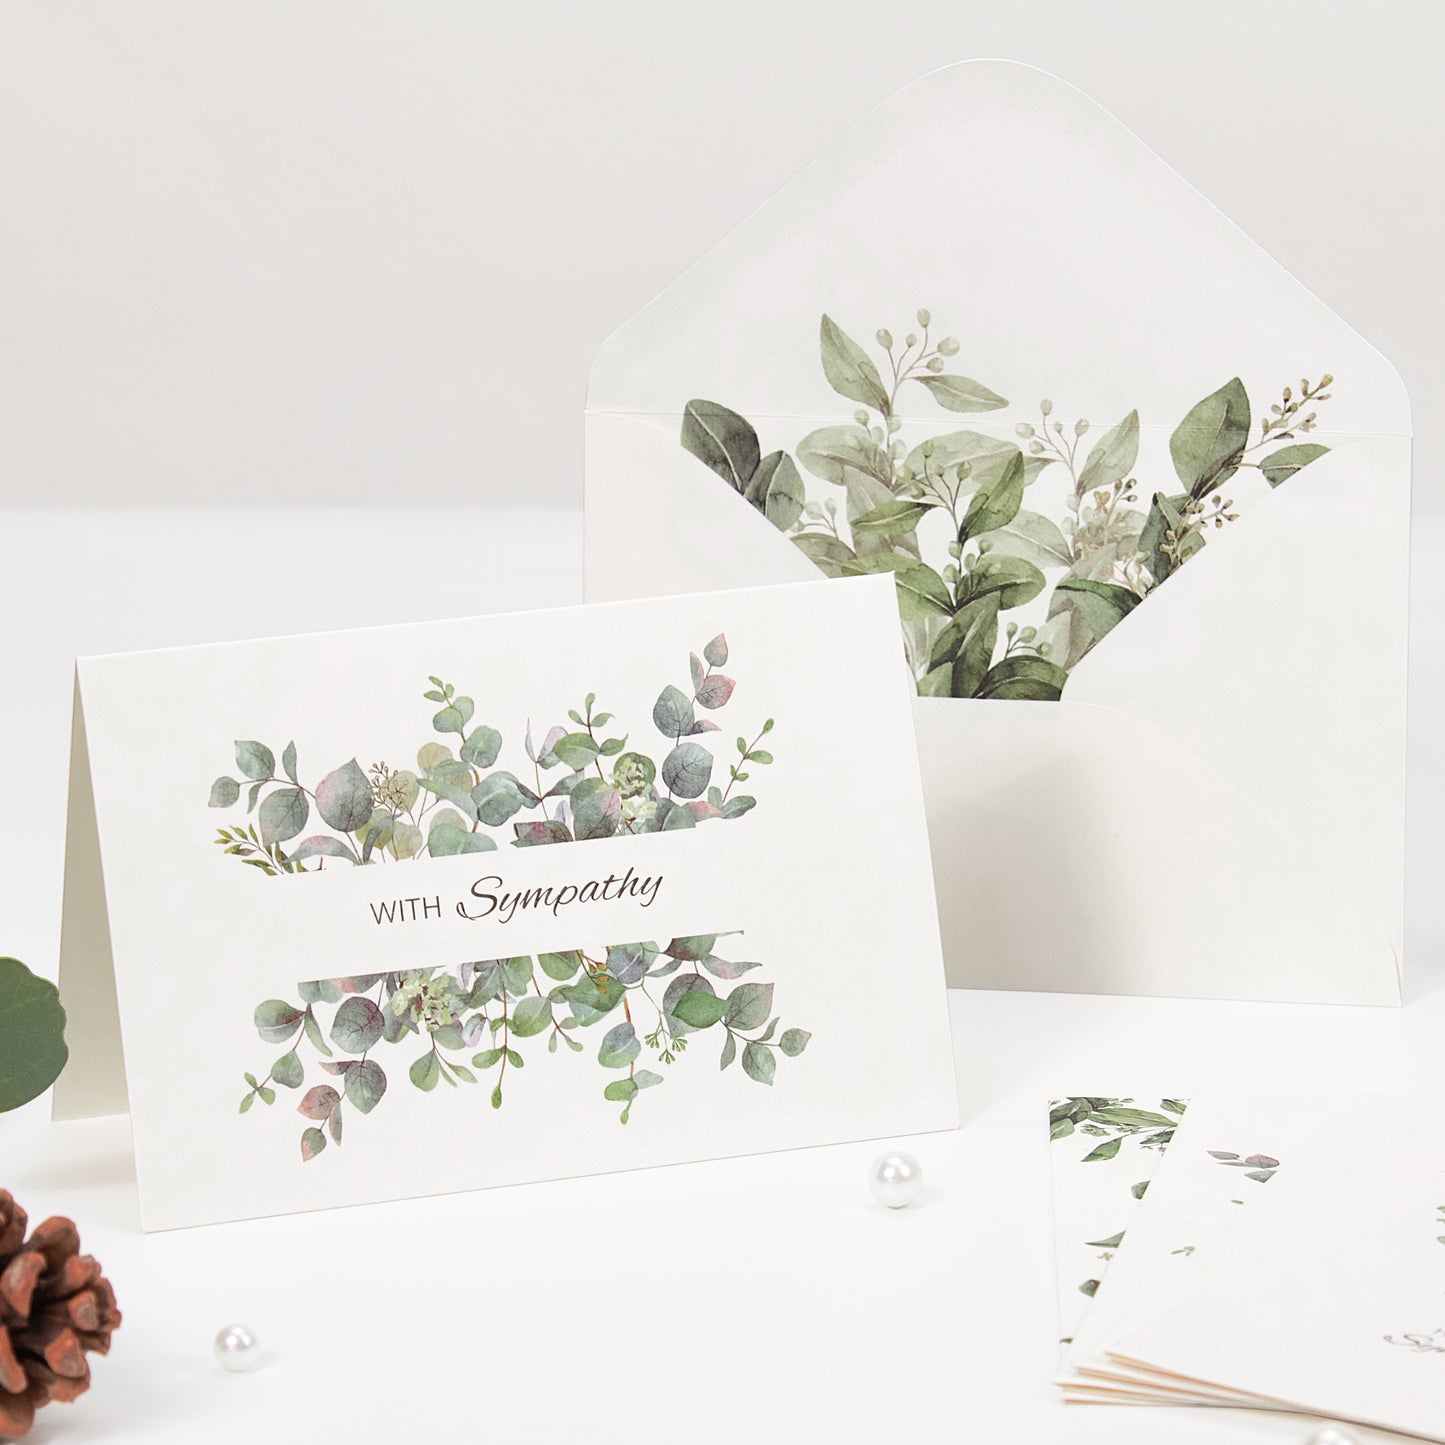 Crisky 25 Pack Greenery Eucalyptus Sympathy Cards with Envelopes Boxed 4 Assortment Condolence/Bereavement Cards